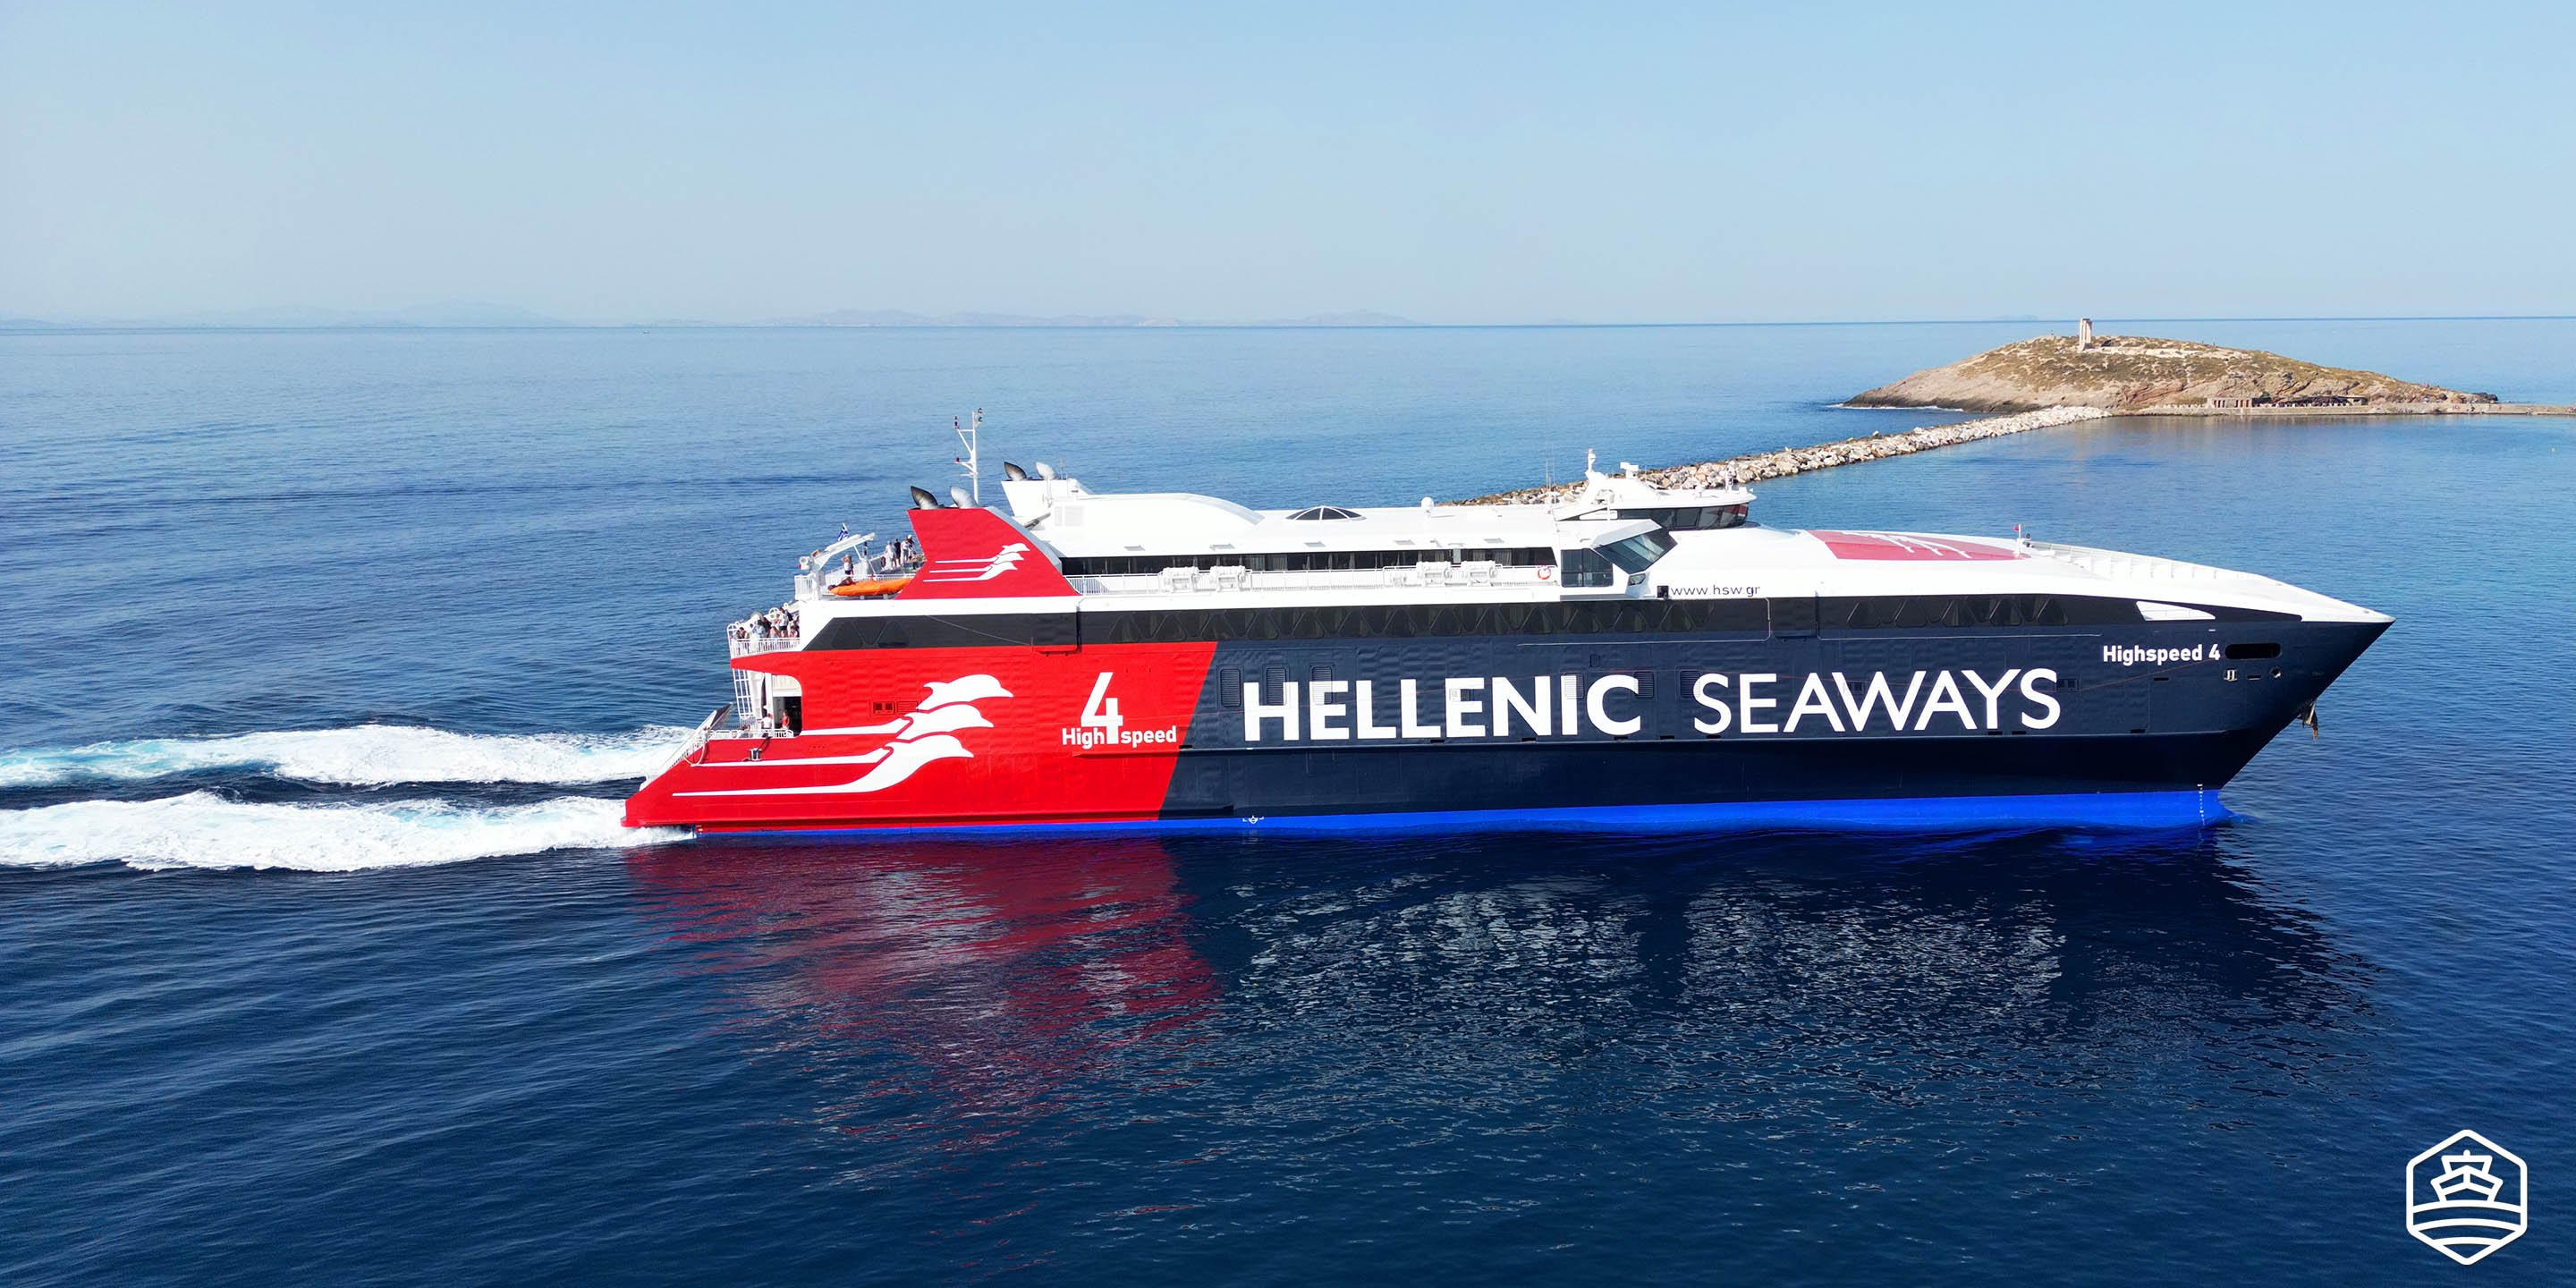 The ferry High Speed 4 by Hellenic Seaways arriving at the port of Naxos, from Piraeus in Athens